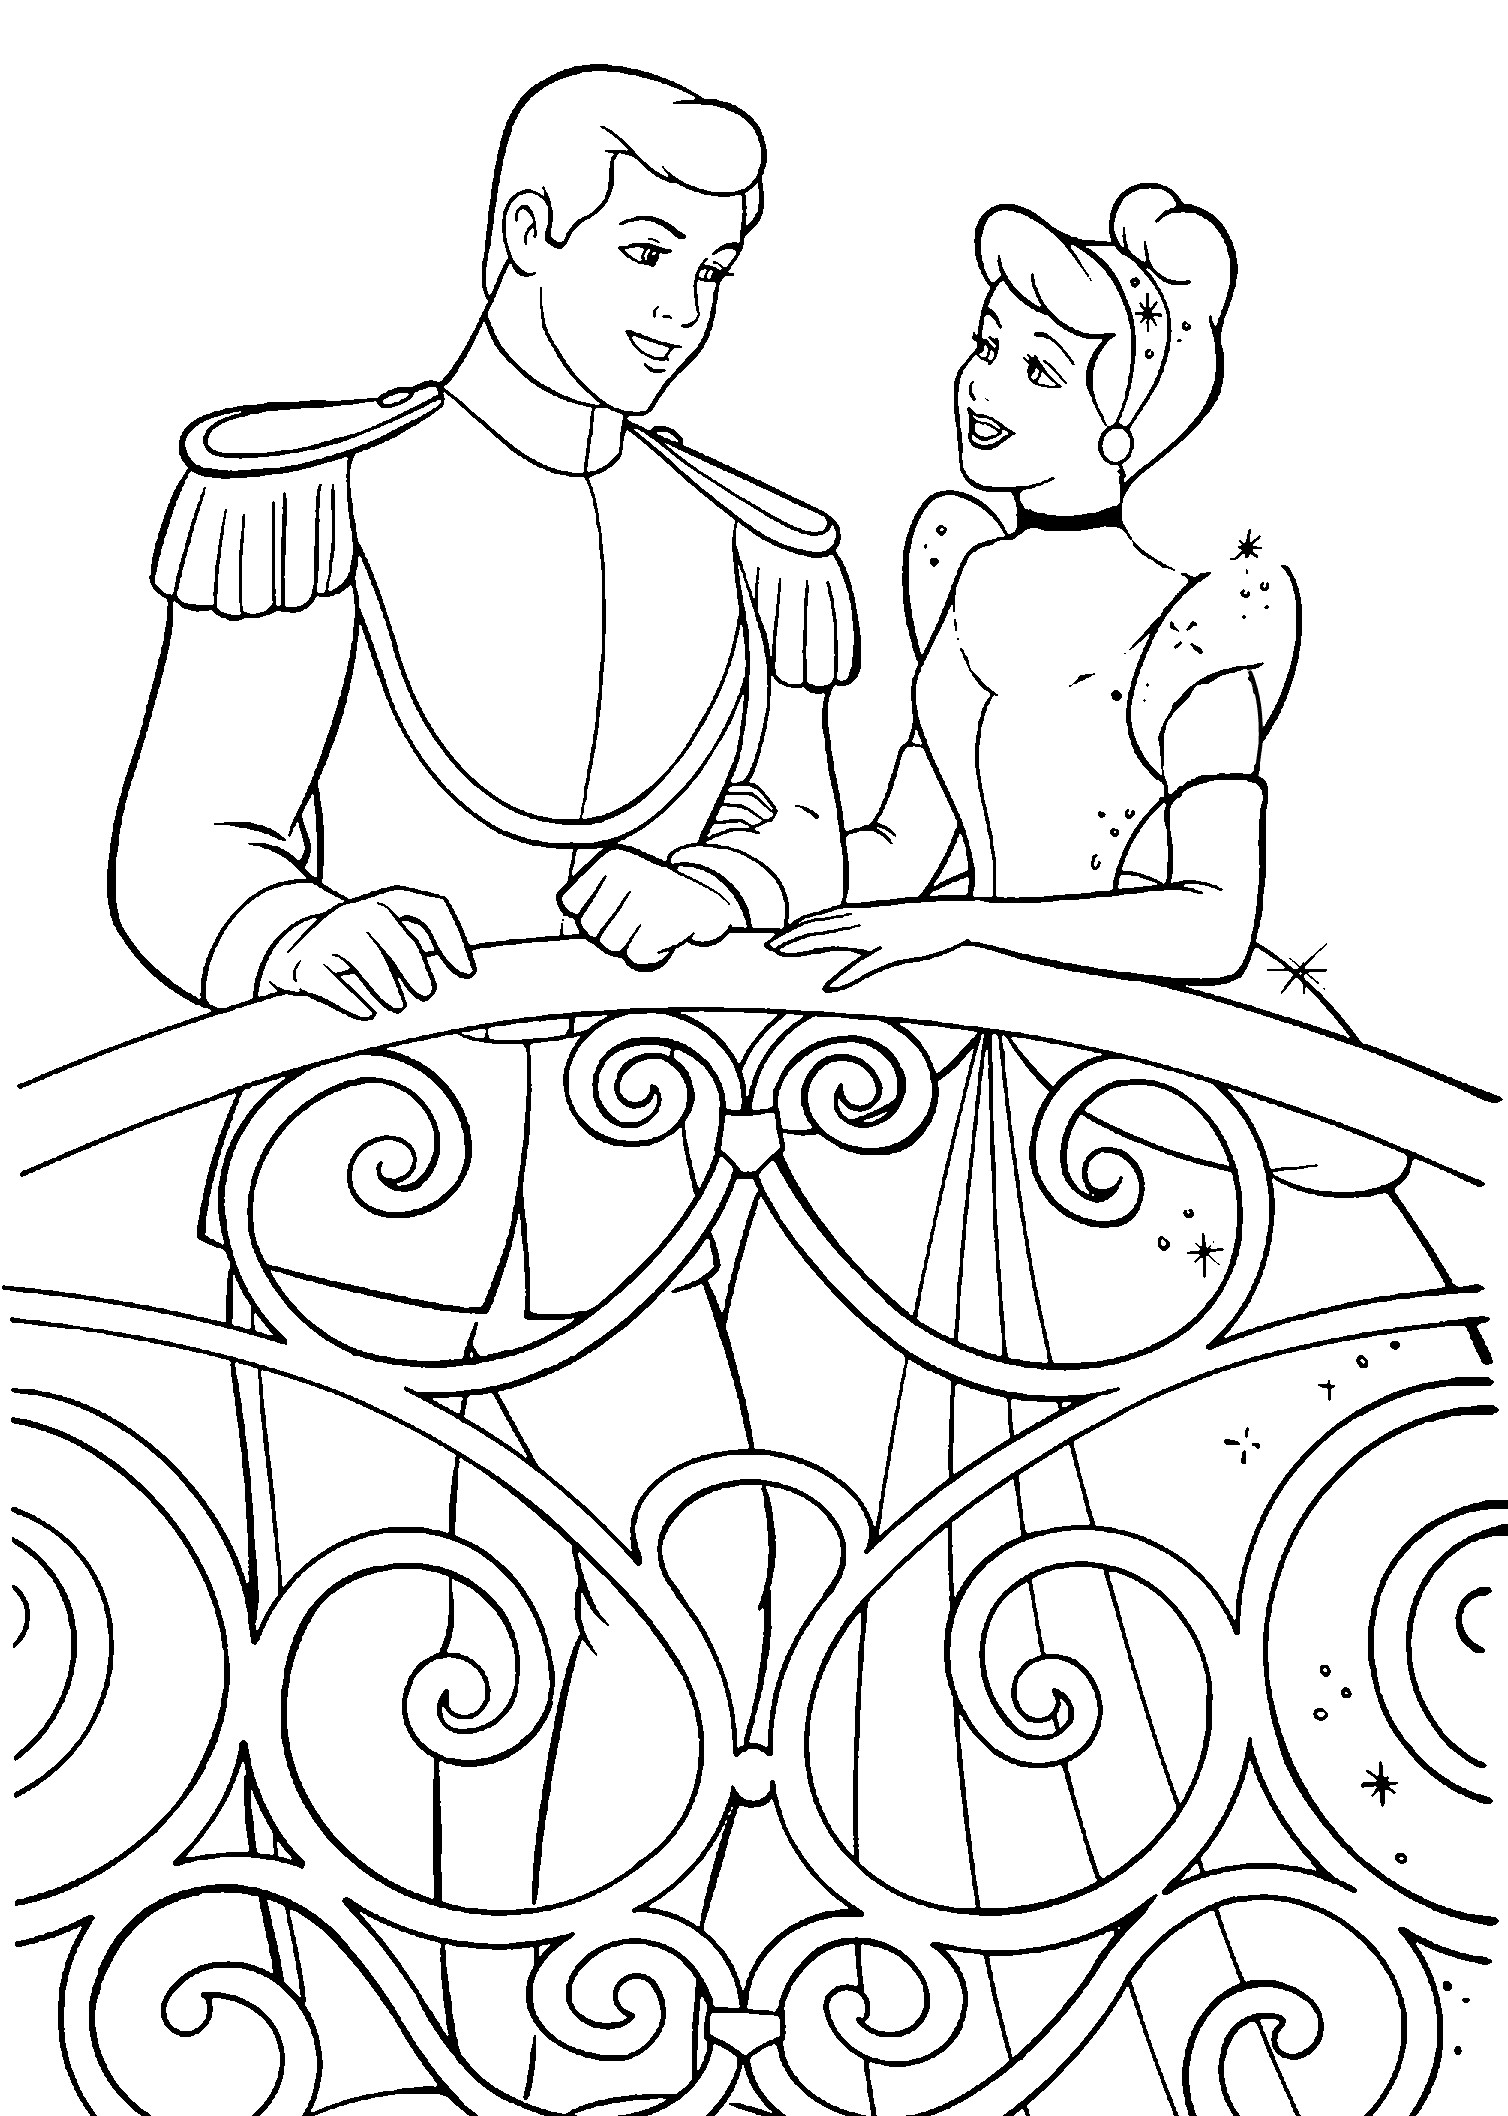 Disney Coloring Pages Free
 Free Printable Disney Princess Coloring Pages For Kids